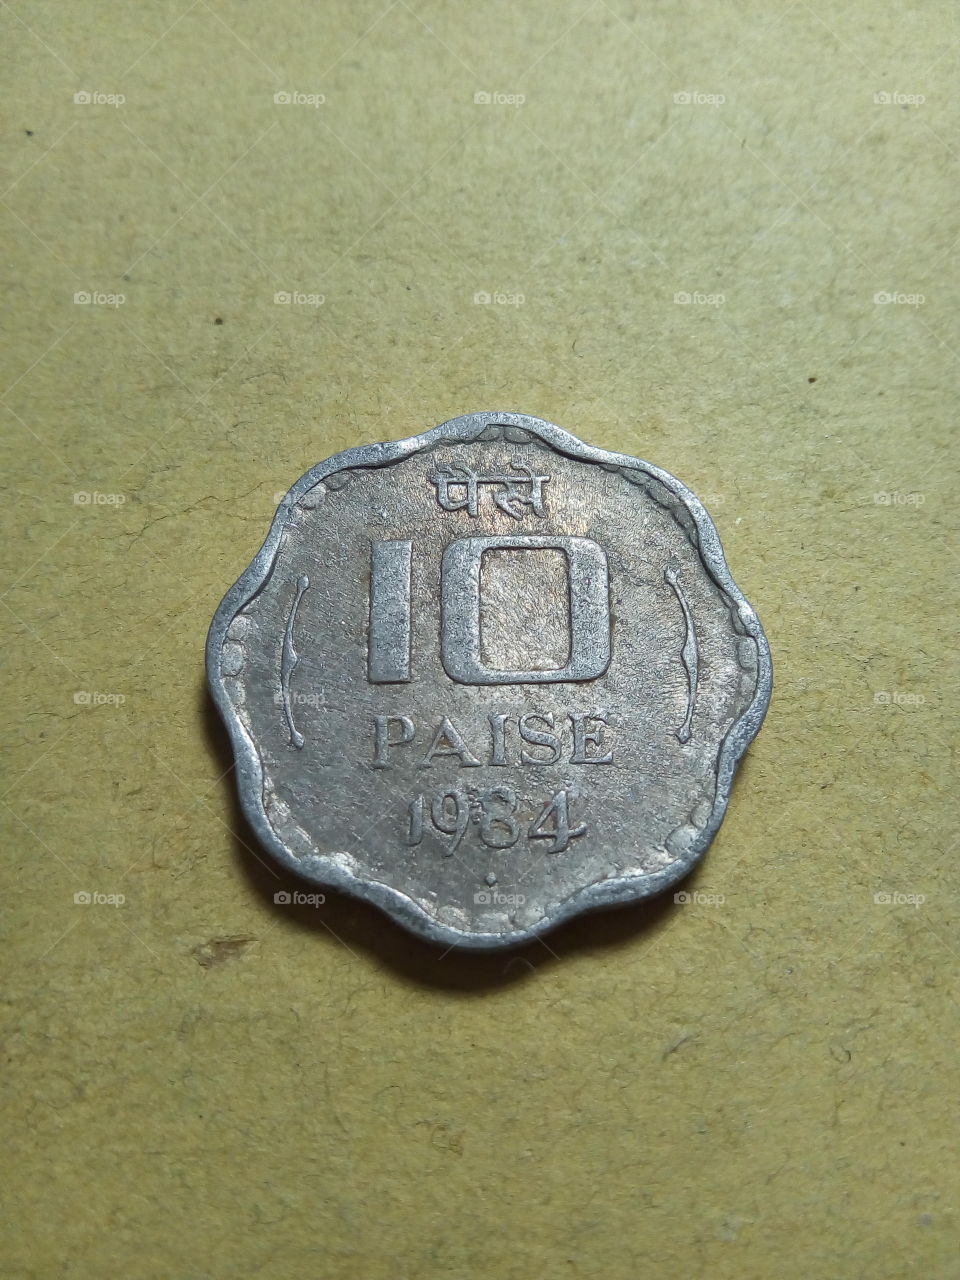 A coin of ten paise- 1/10 share of Indian Rupee issued by Government of India in 1984.